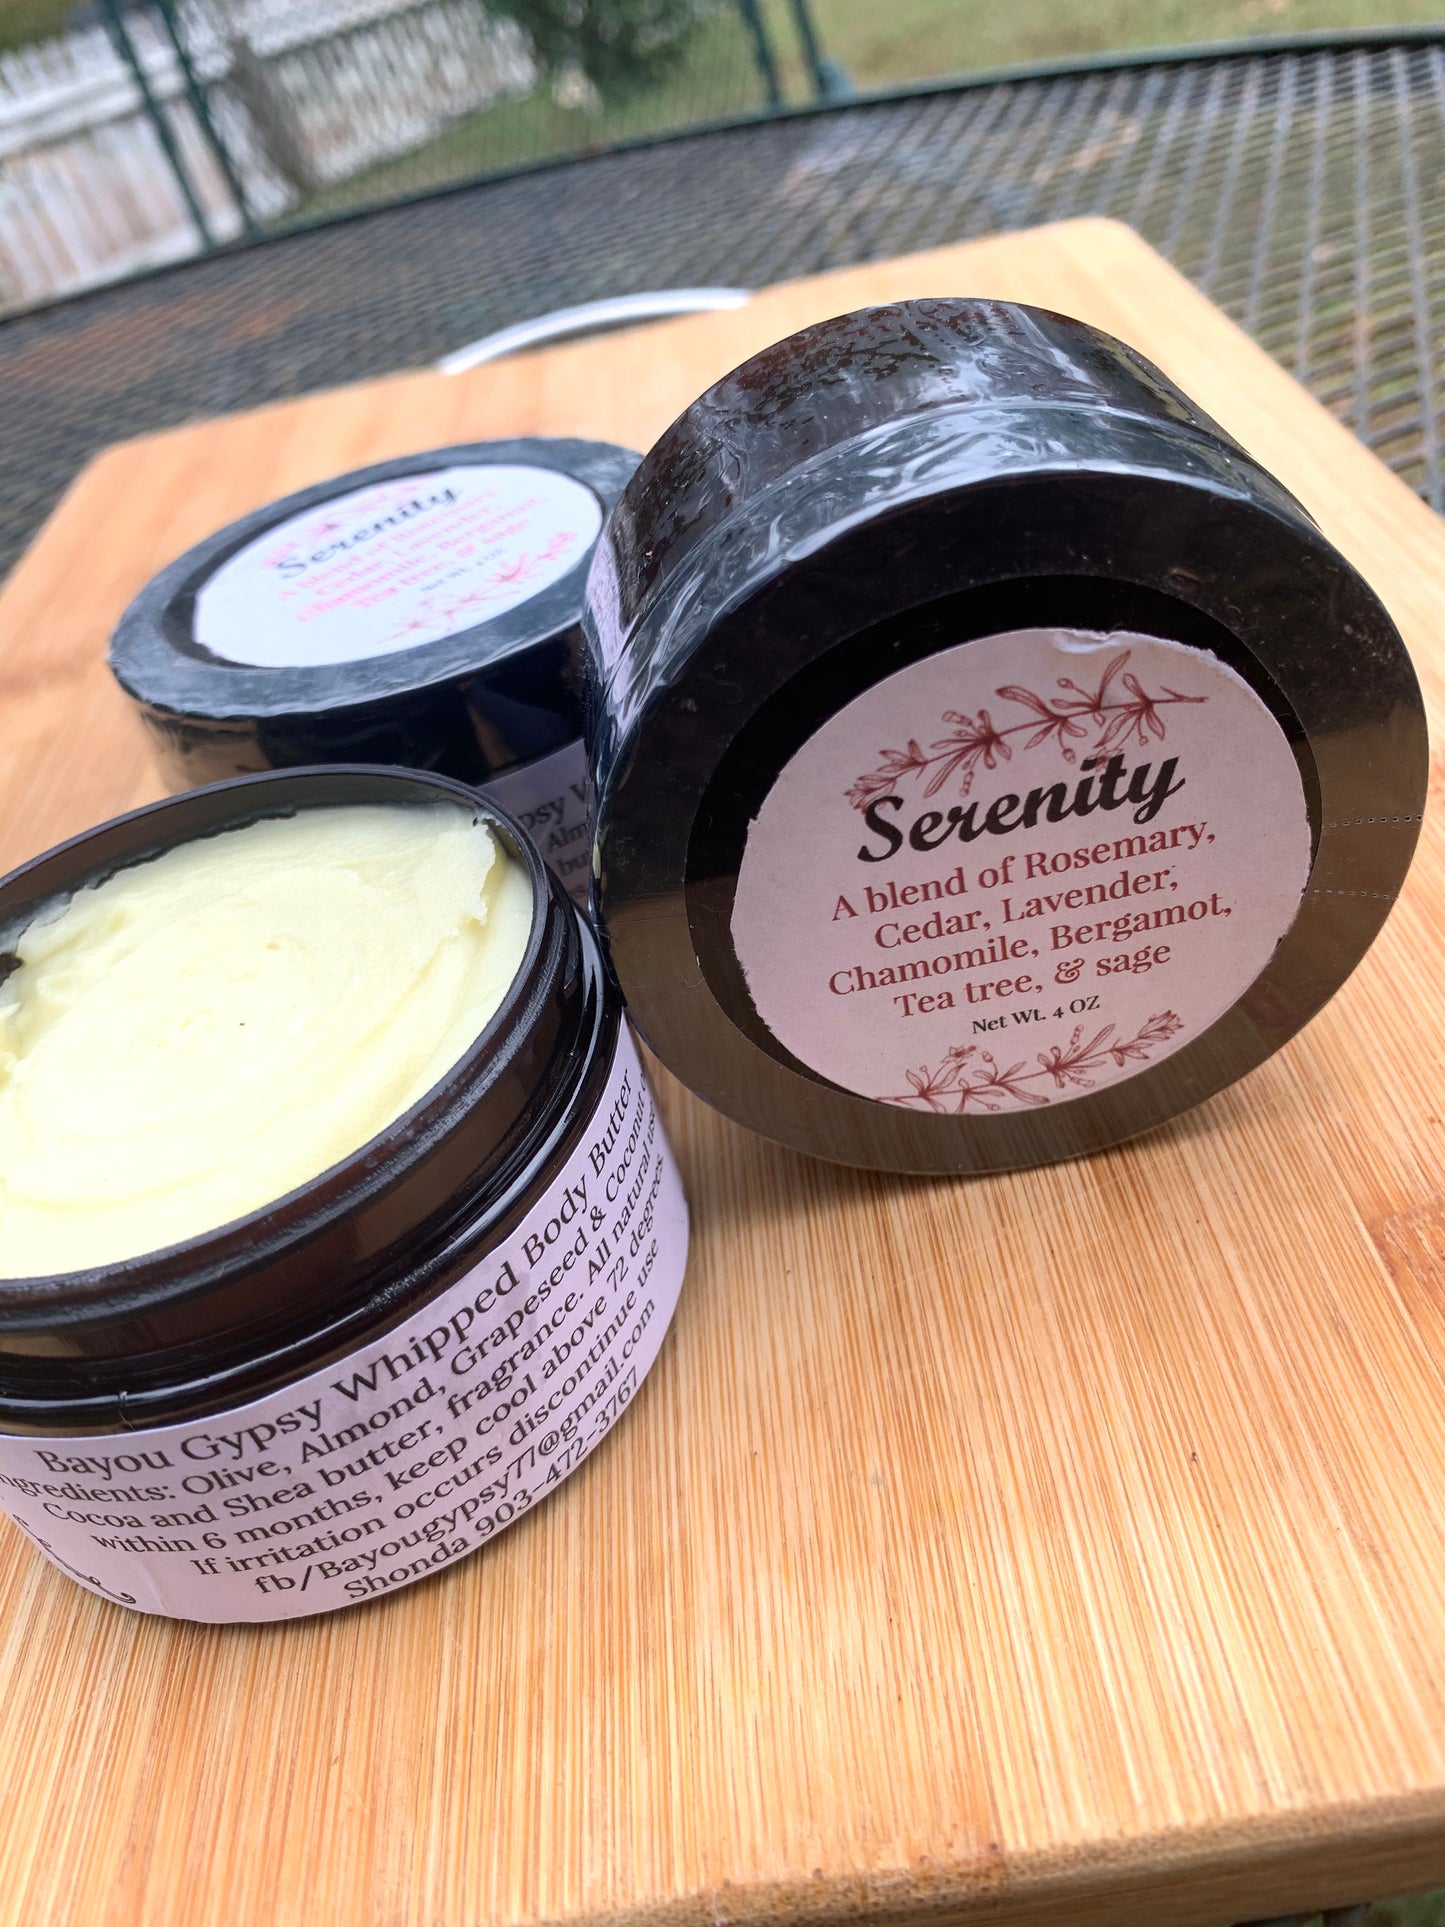 Serenity body butter~  A refreshing blend of Rosemary, Cedar, Lavender, Chamomile, Bergamot, Teatree and sage.